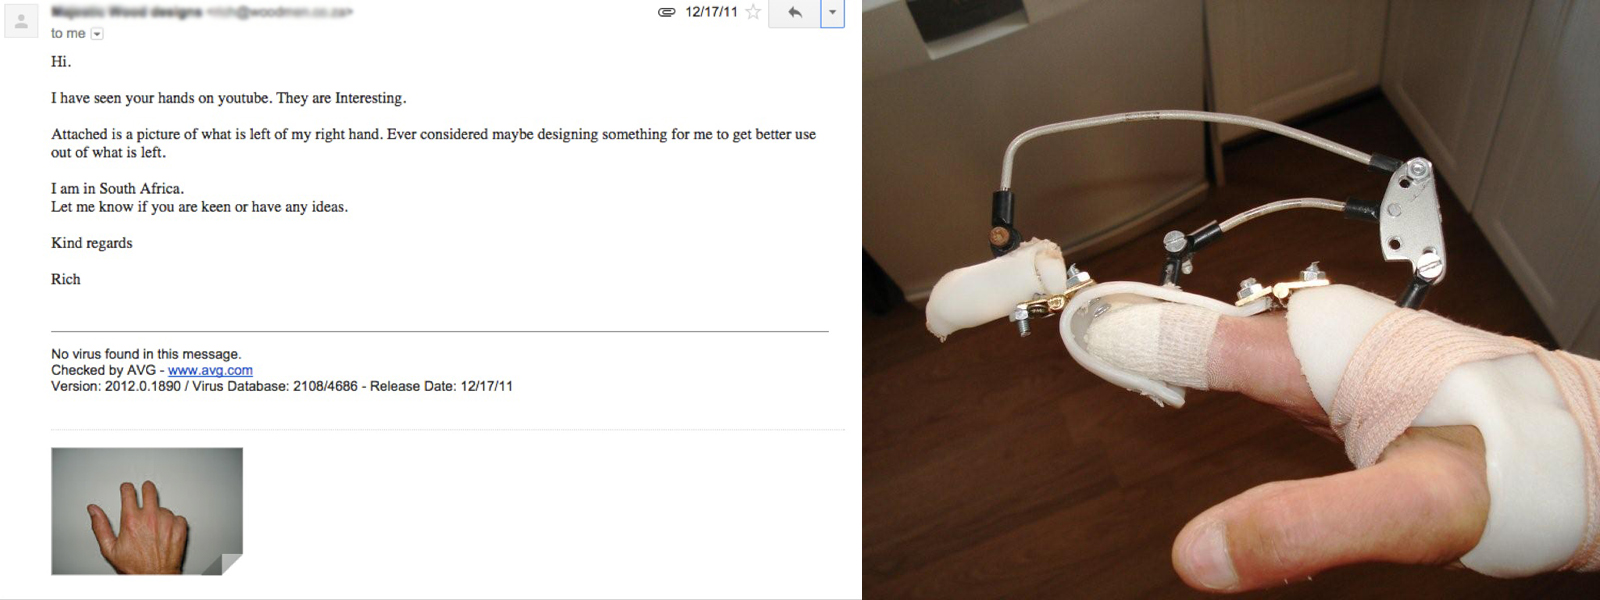 Original email sent to Ivan from Richard asking for help to create a prosthetic finger.